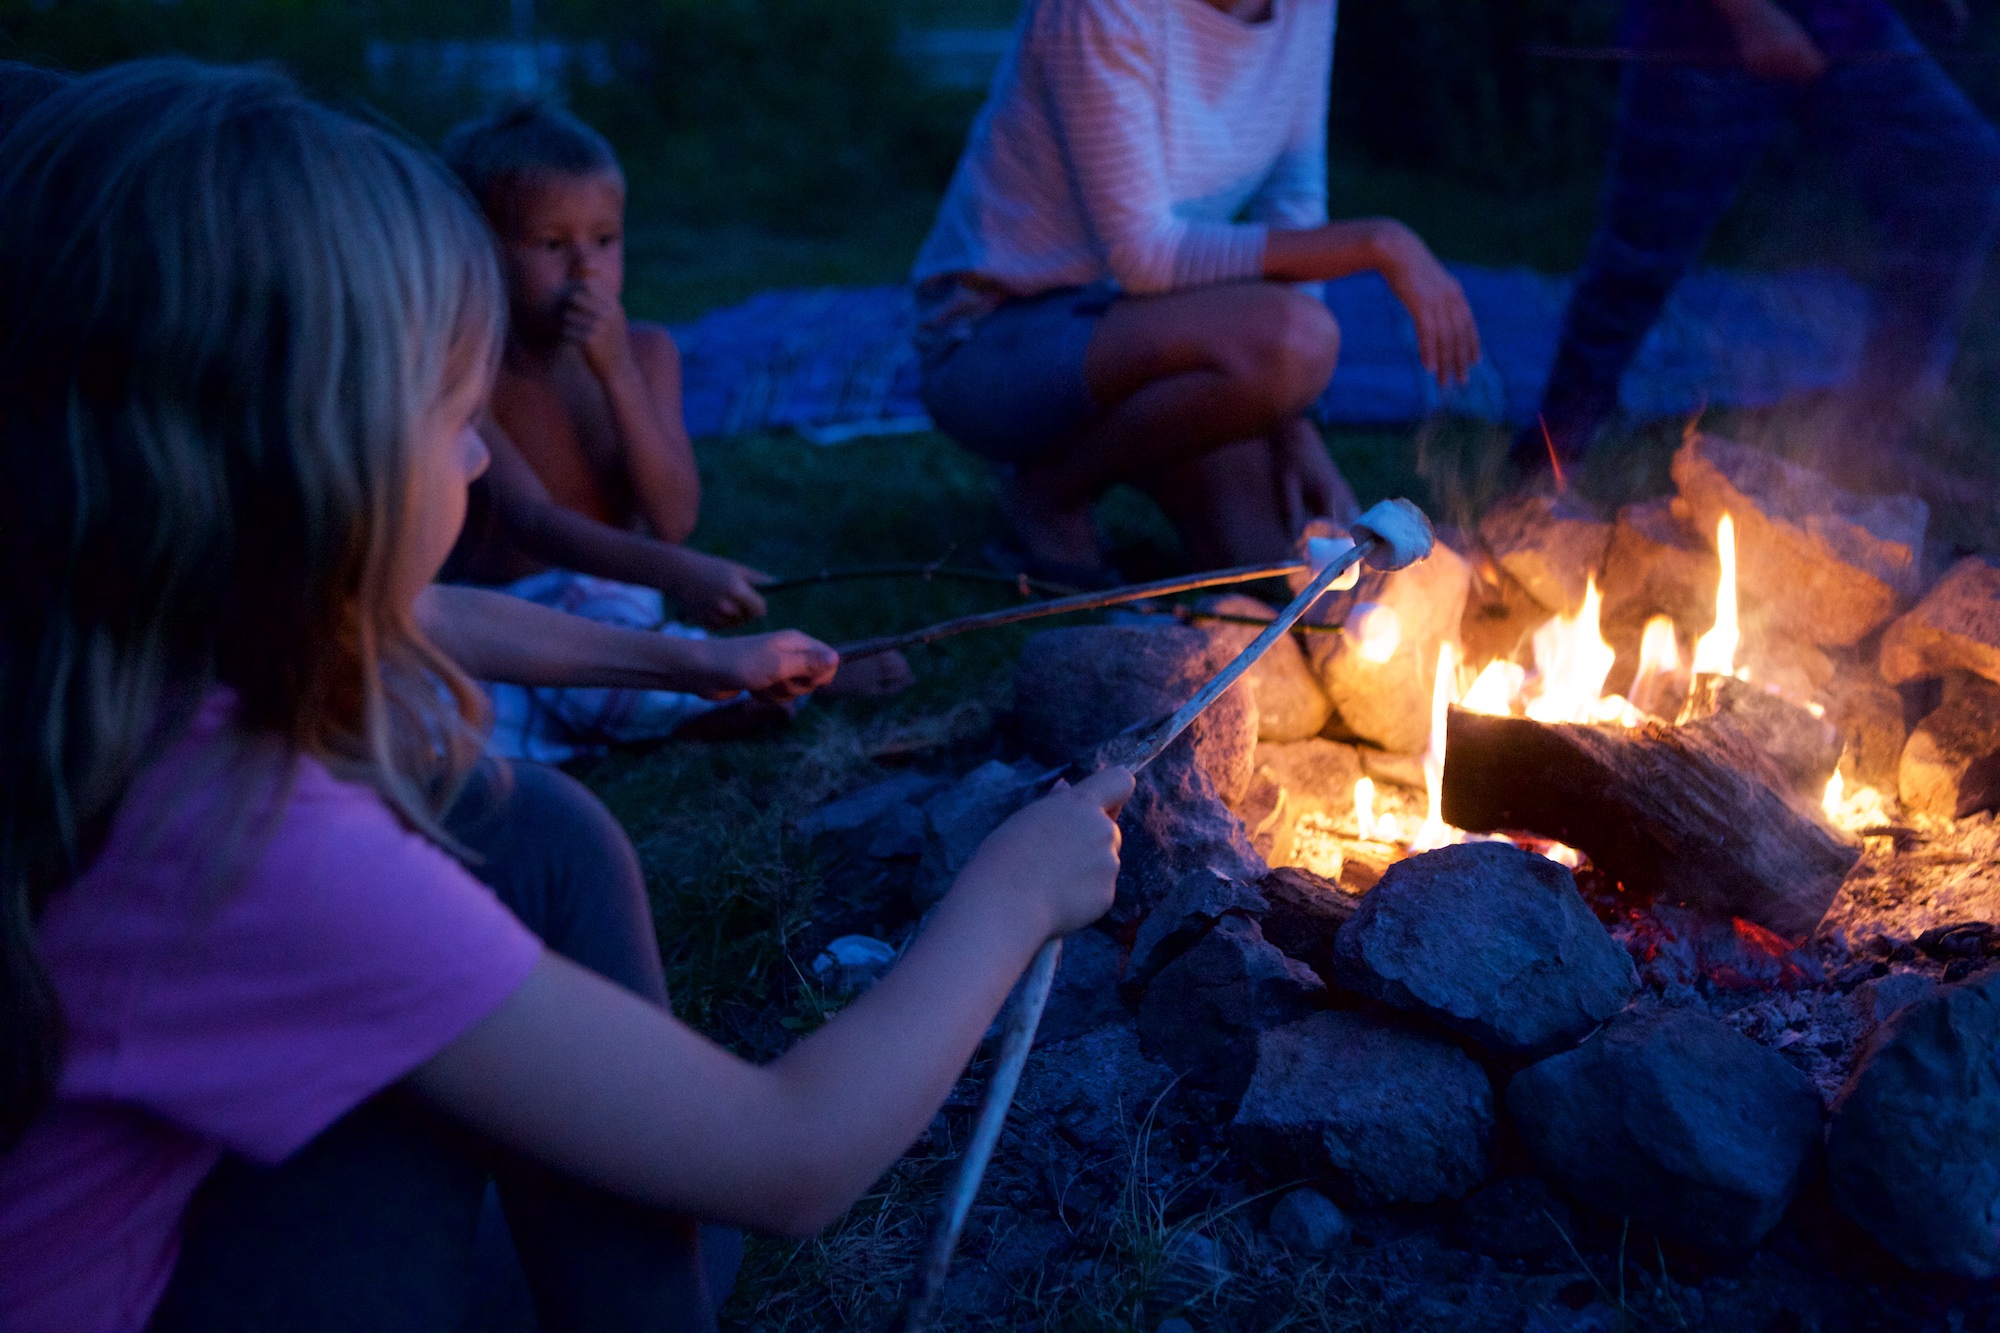 Group of young children roasting marshmallows around a campfire.